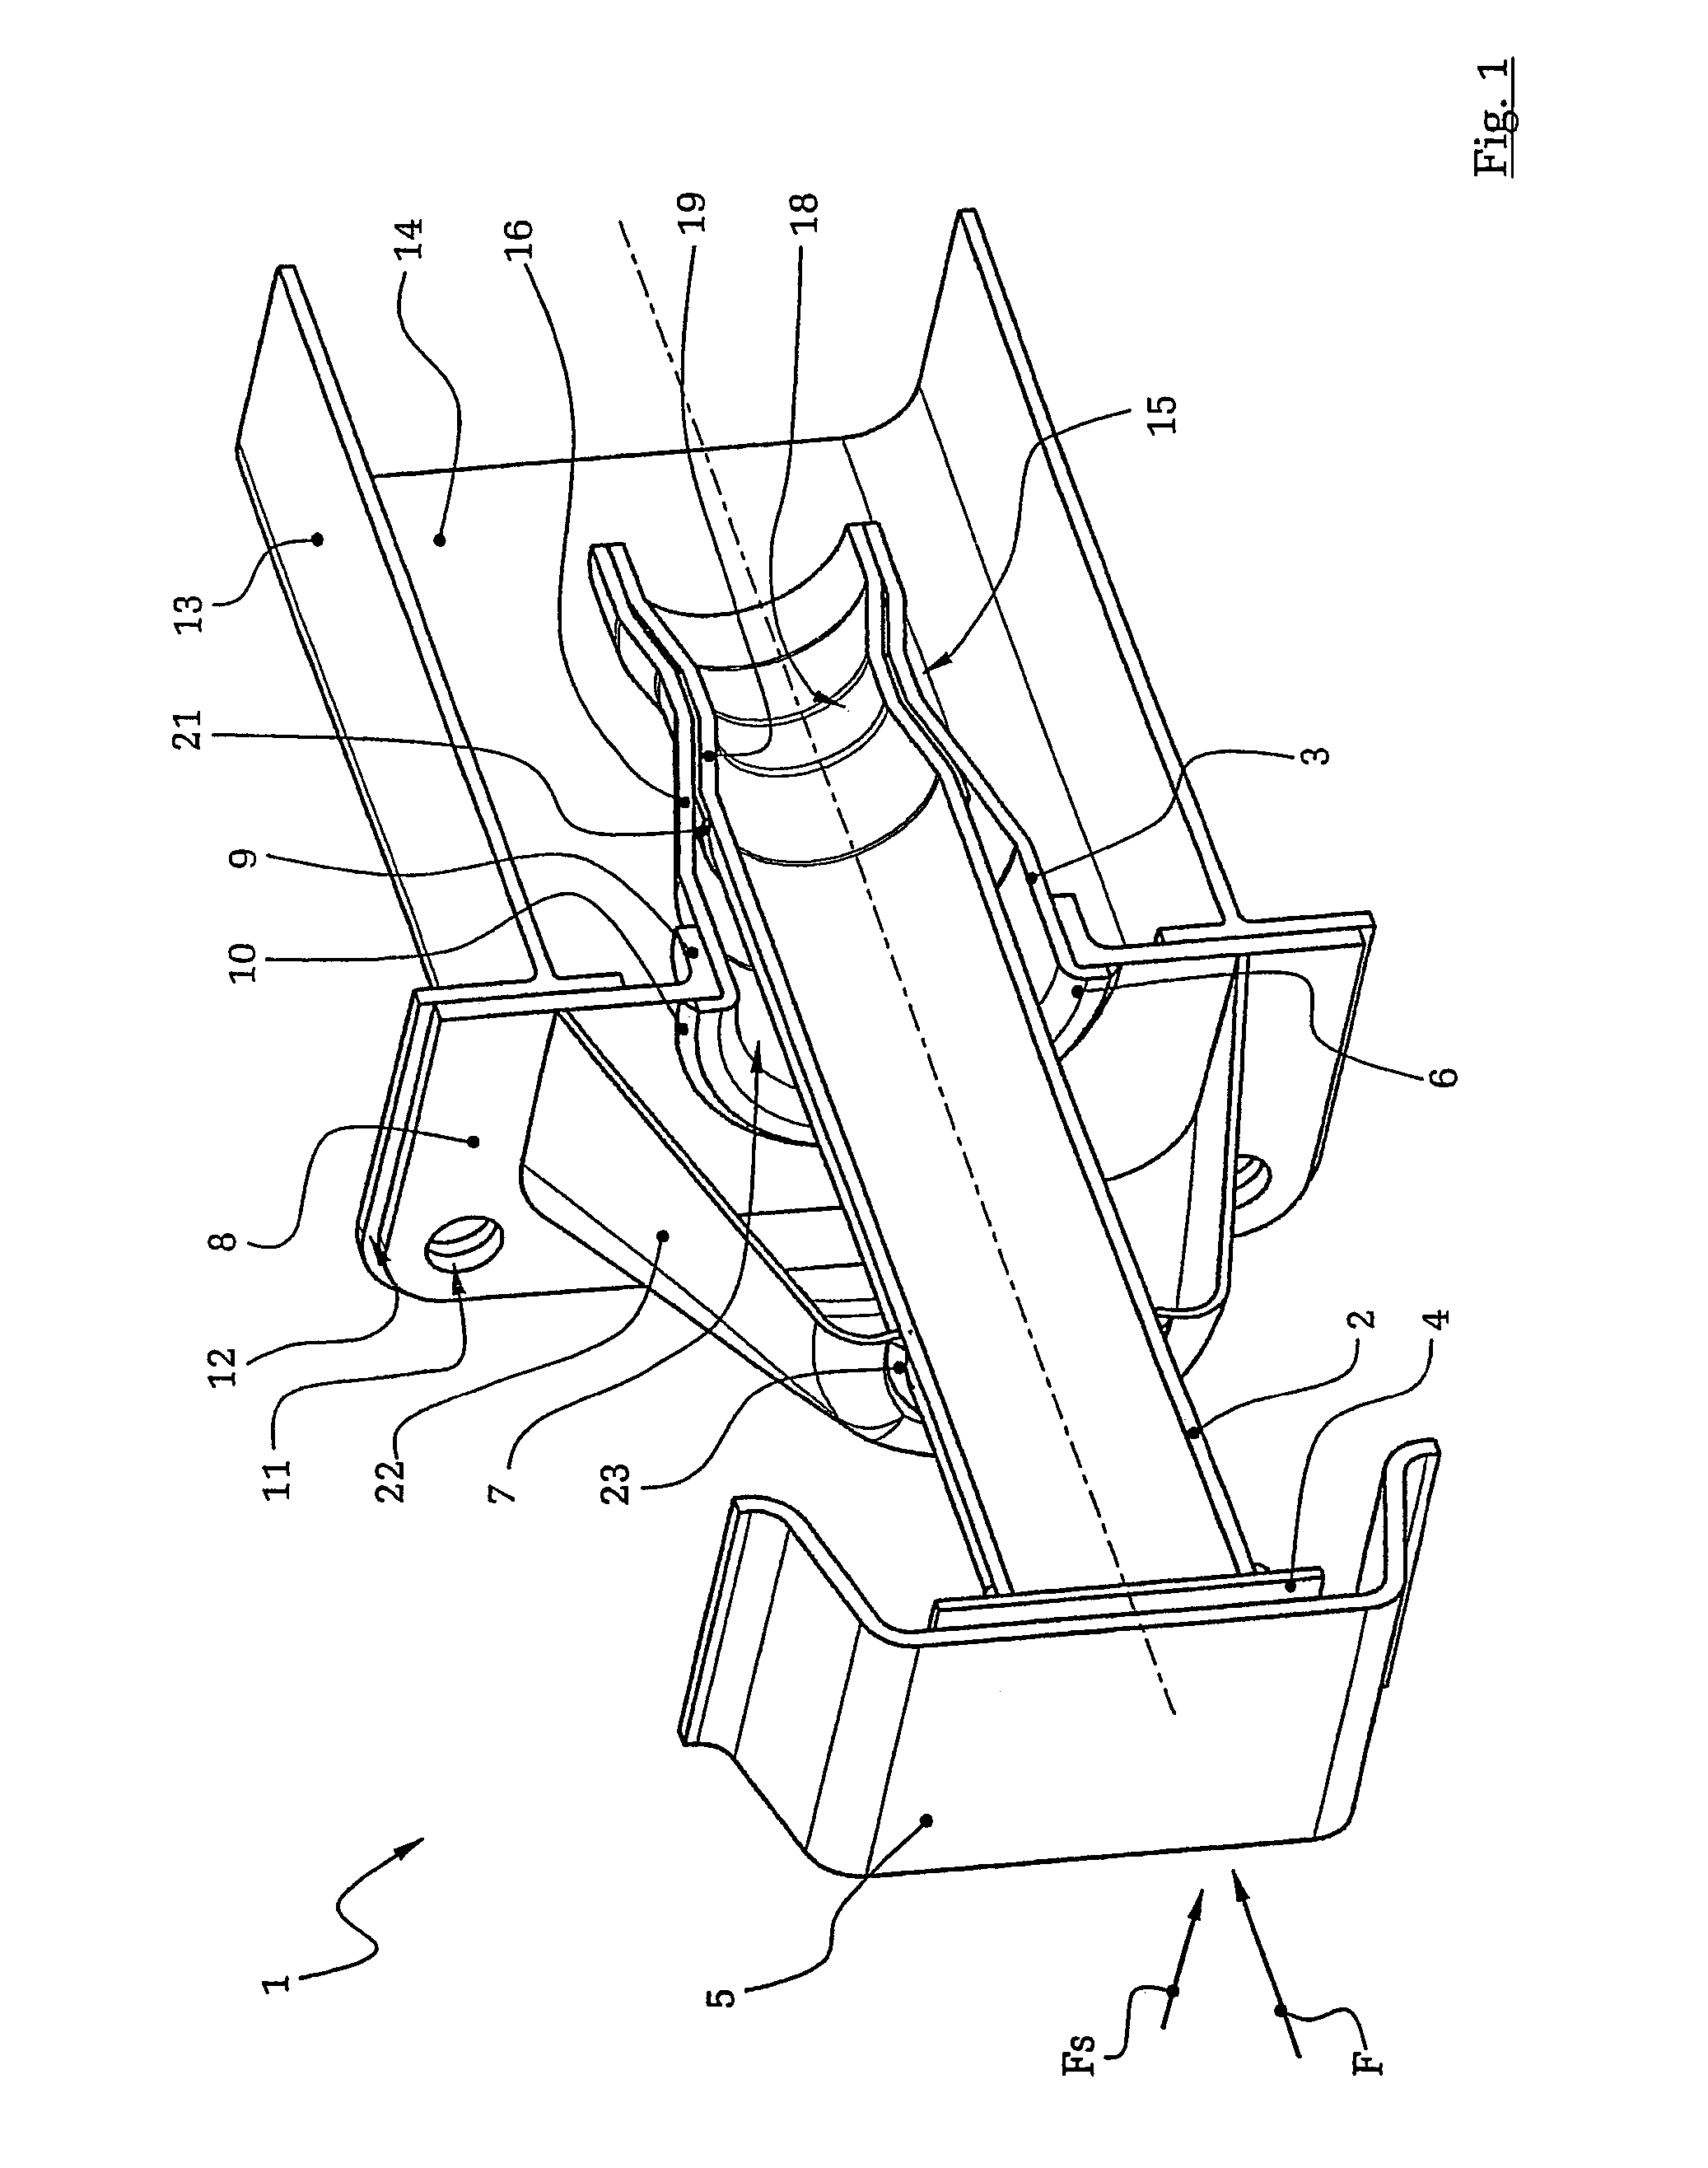 Impact damper assembly for an automobile